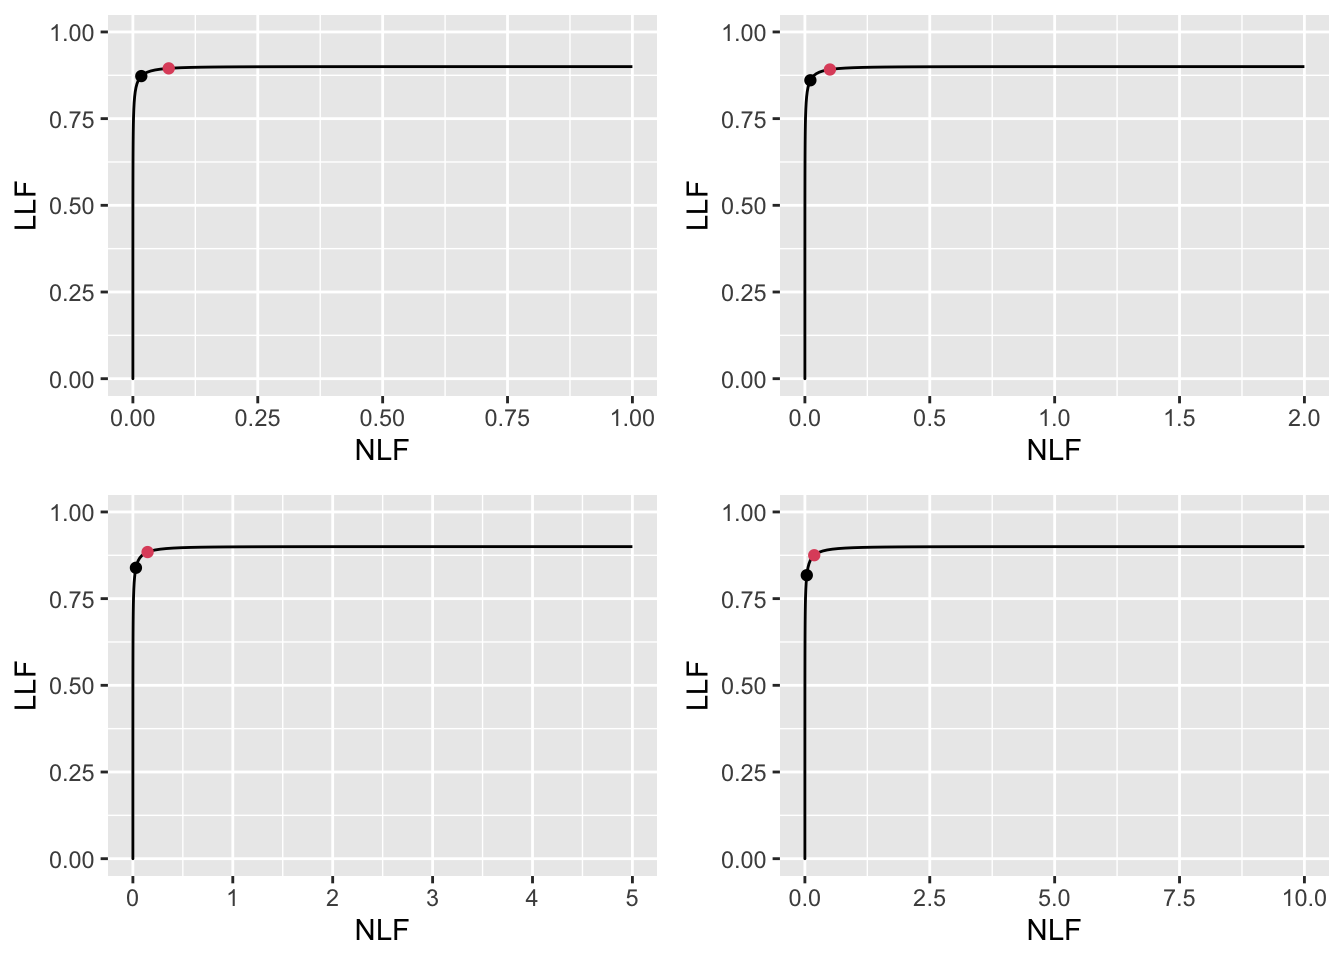 High performance varying $\lambda$ FROC plots with superimposed operating points. The red dot corresponds to $\text{wAFROC}_\text{AUC}$ optimization and the black dot to Youden-index optimization. The values of $\lambda$ are: top-left $\lambda = 1$, top-right $\lambda = 2$, bottom-left $\lambda = 5$ and bottom-right $\lambda = 10$.